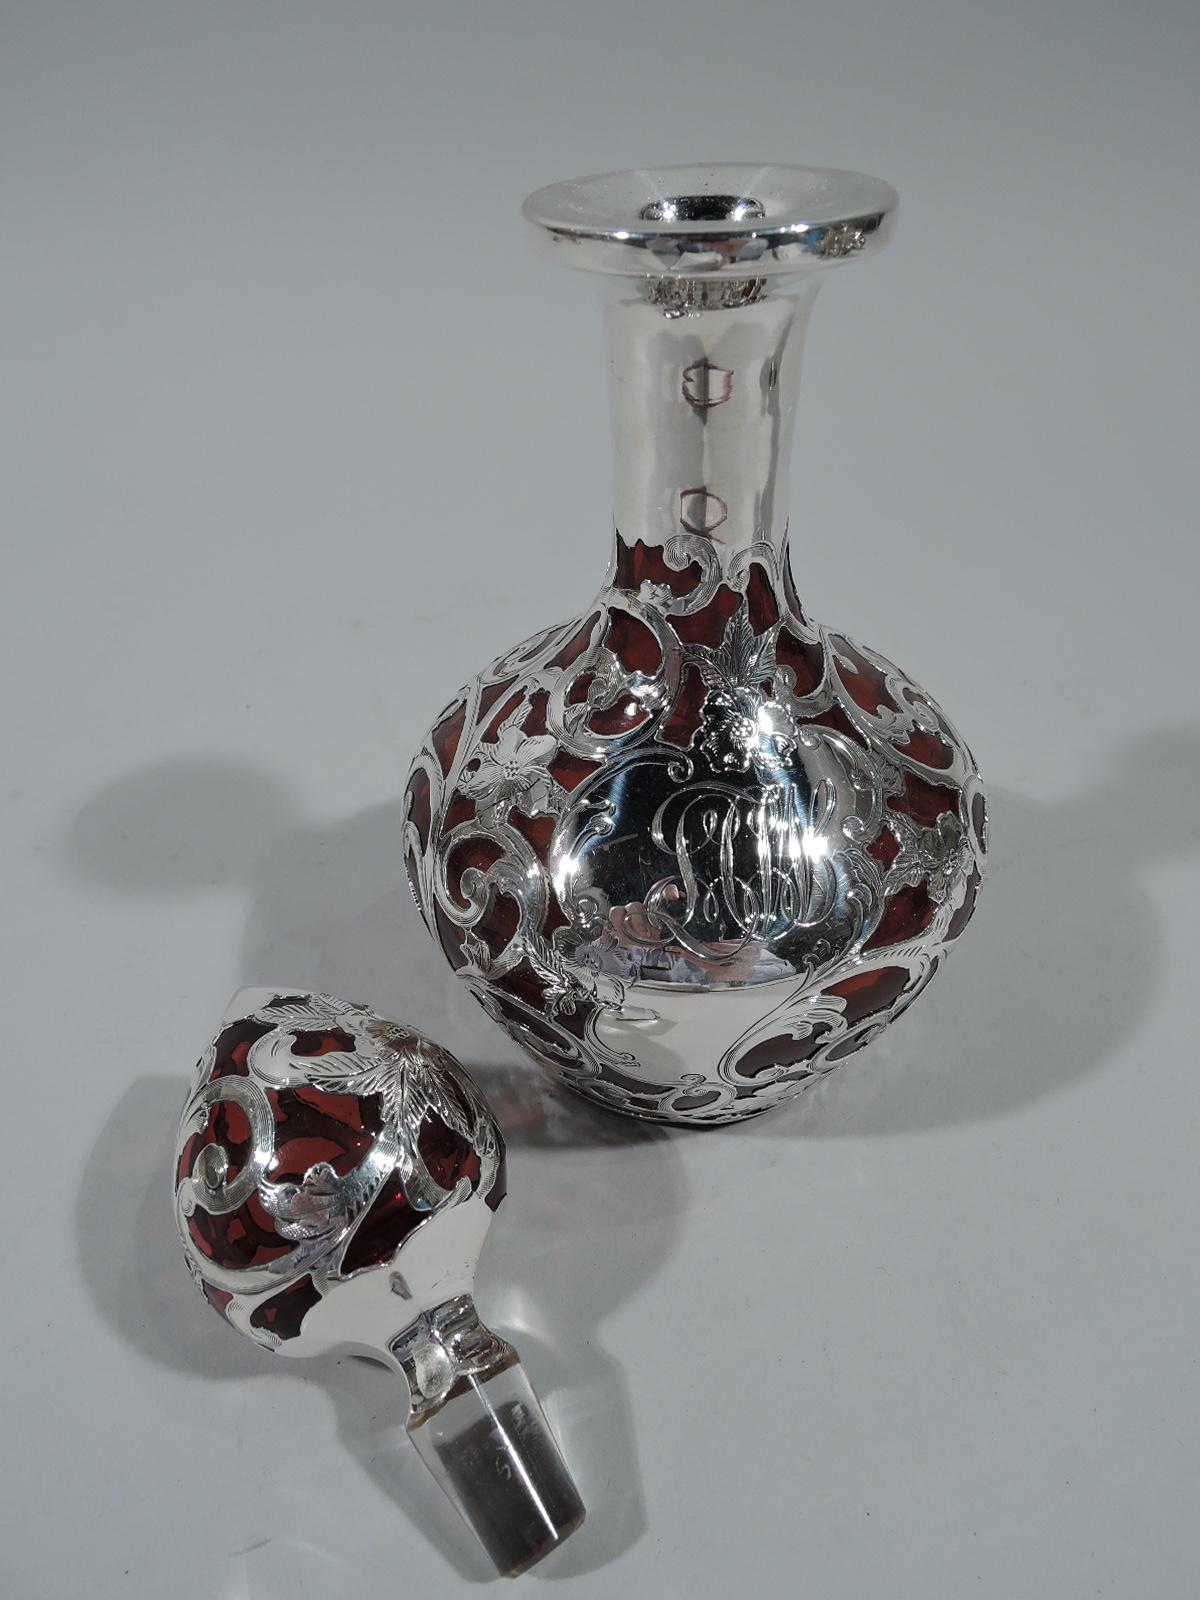 Art Nouveau cranberry glass perfume with silver overlay. Made by Gorham in Providence, ca 1890. Ovoid bottle, cylindrical neck, and everted rim. Ovoid stopper with faceted base and short clear glass plug. Overlay in form of dense pell-mell